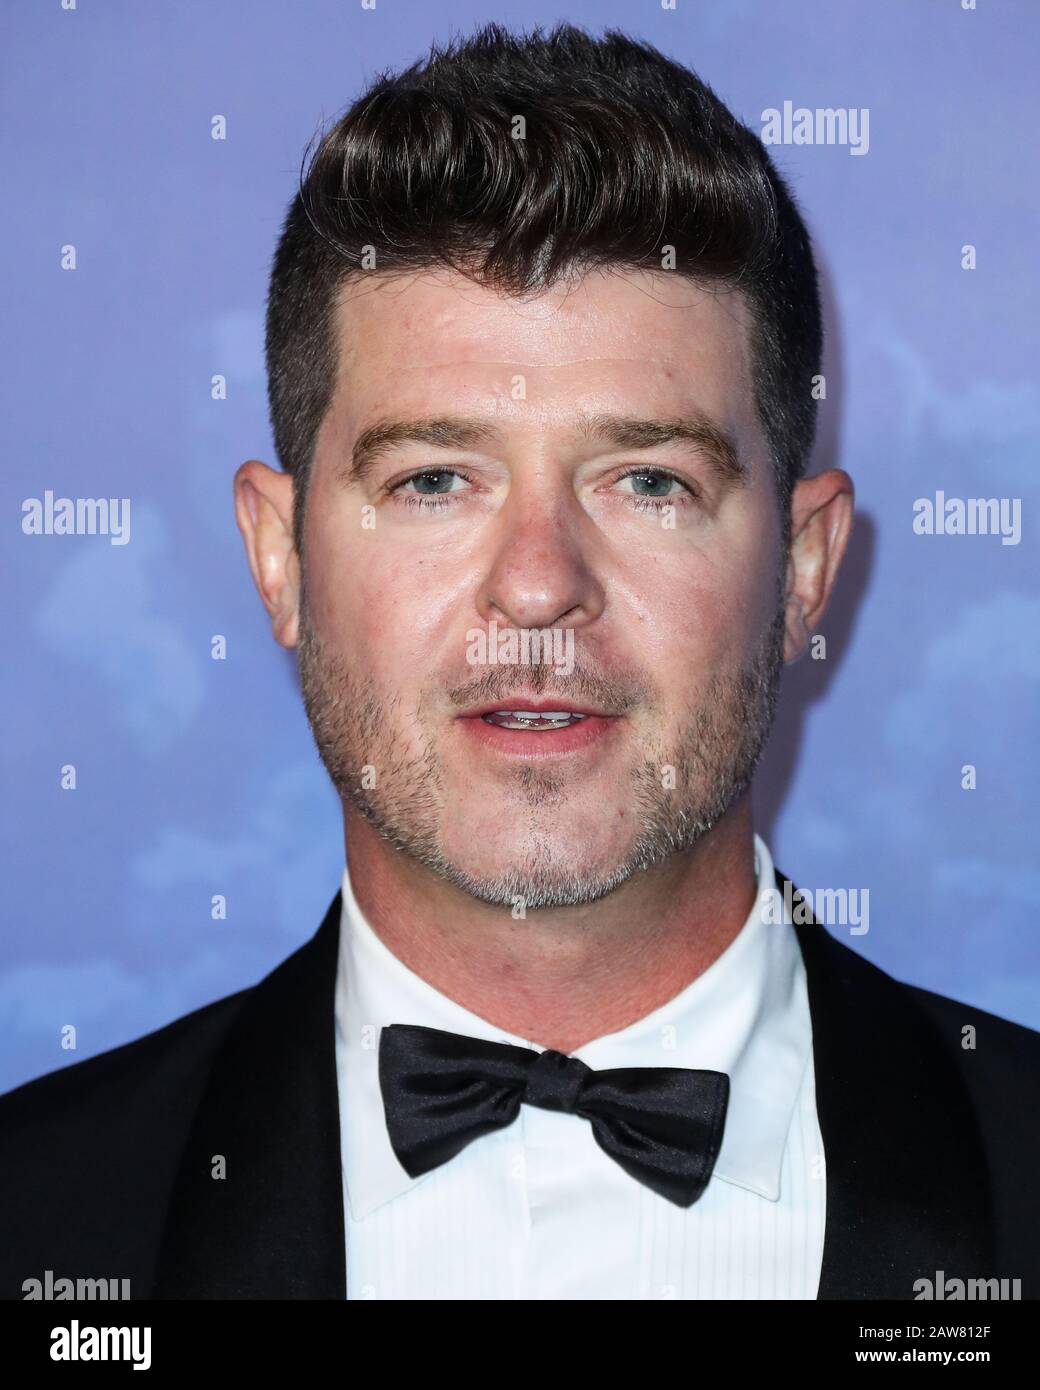 Beverly Hills, United States. 06th Feb, 2020. BEVERLY HILLS, LOS ANGELES, CALIFORNIA, USA - FEBRUARY 06: Singer Robin Thicke arrives at the 2020 Hollywood For The Global Ocean Gala Honoring HSH Prince Albert II Of Monaco held at the Palazzo di Amore on February 6, 2020 in Beverly Hills, Los Angeles, California, United States. (Photo by Xavier Collin/Image Press Agency) Credit: Image Press Agency/Alamy Live News Stock Photo